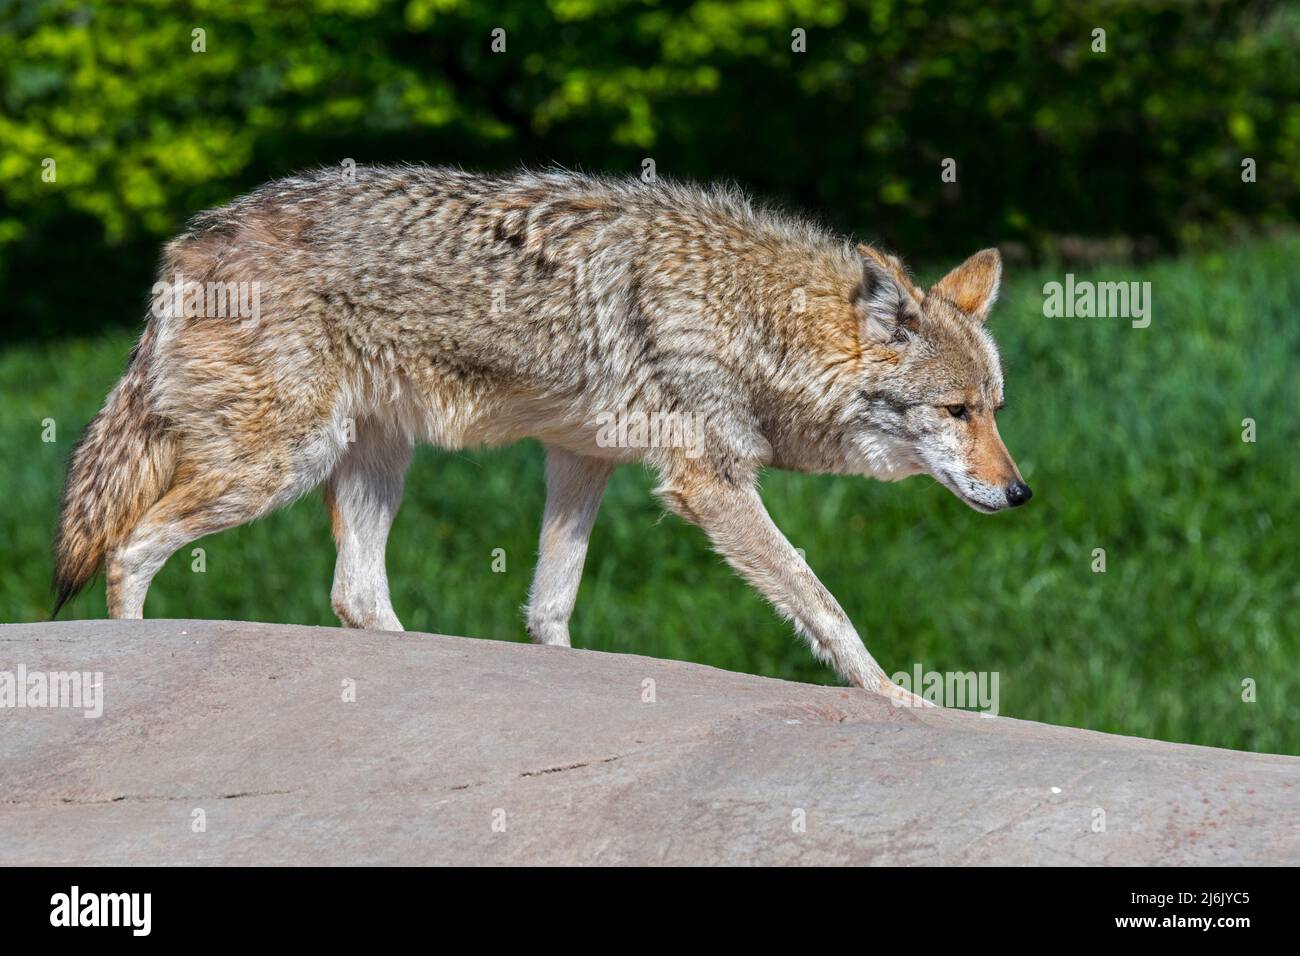 Coyote (Canis latrans) walking over rock, canine native to North America Stock Photo